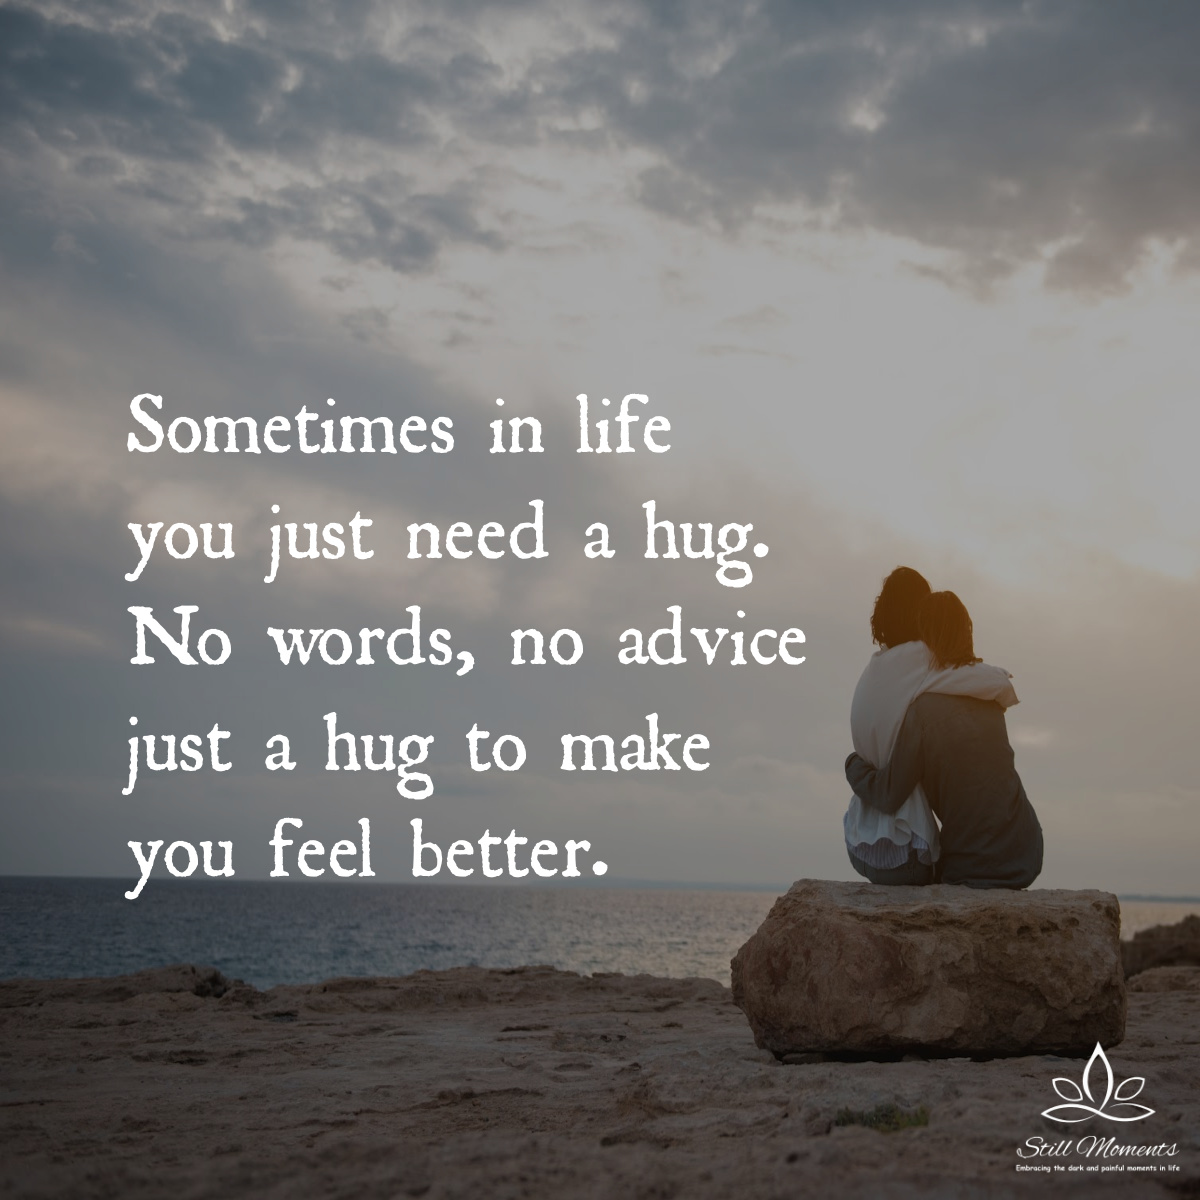 Sometimes In Life You Just Need a Hug - Still Moments